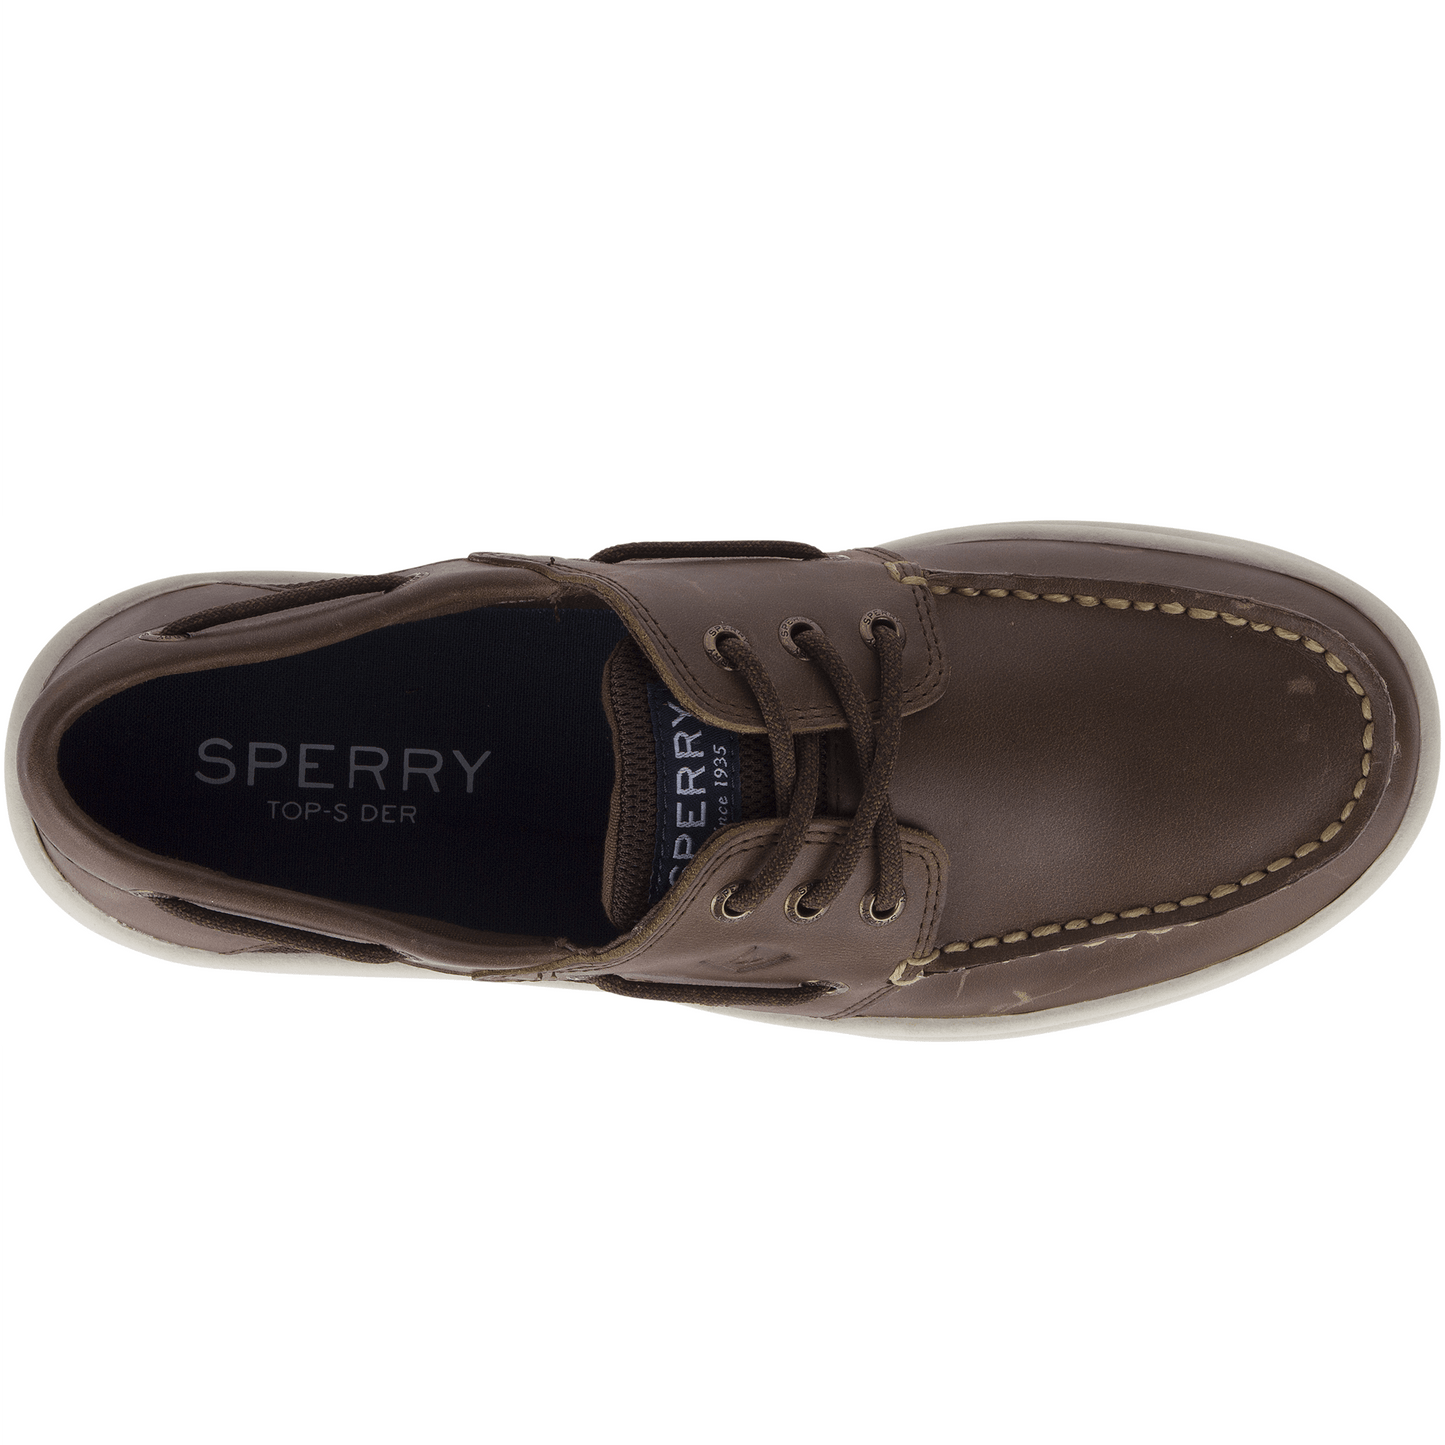 Sperry Men's Convoy 3Eye Tan Boat Shoes (STS17292)